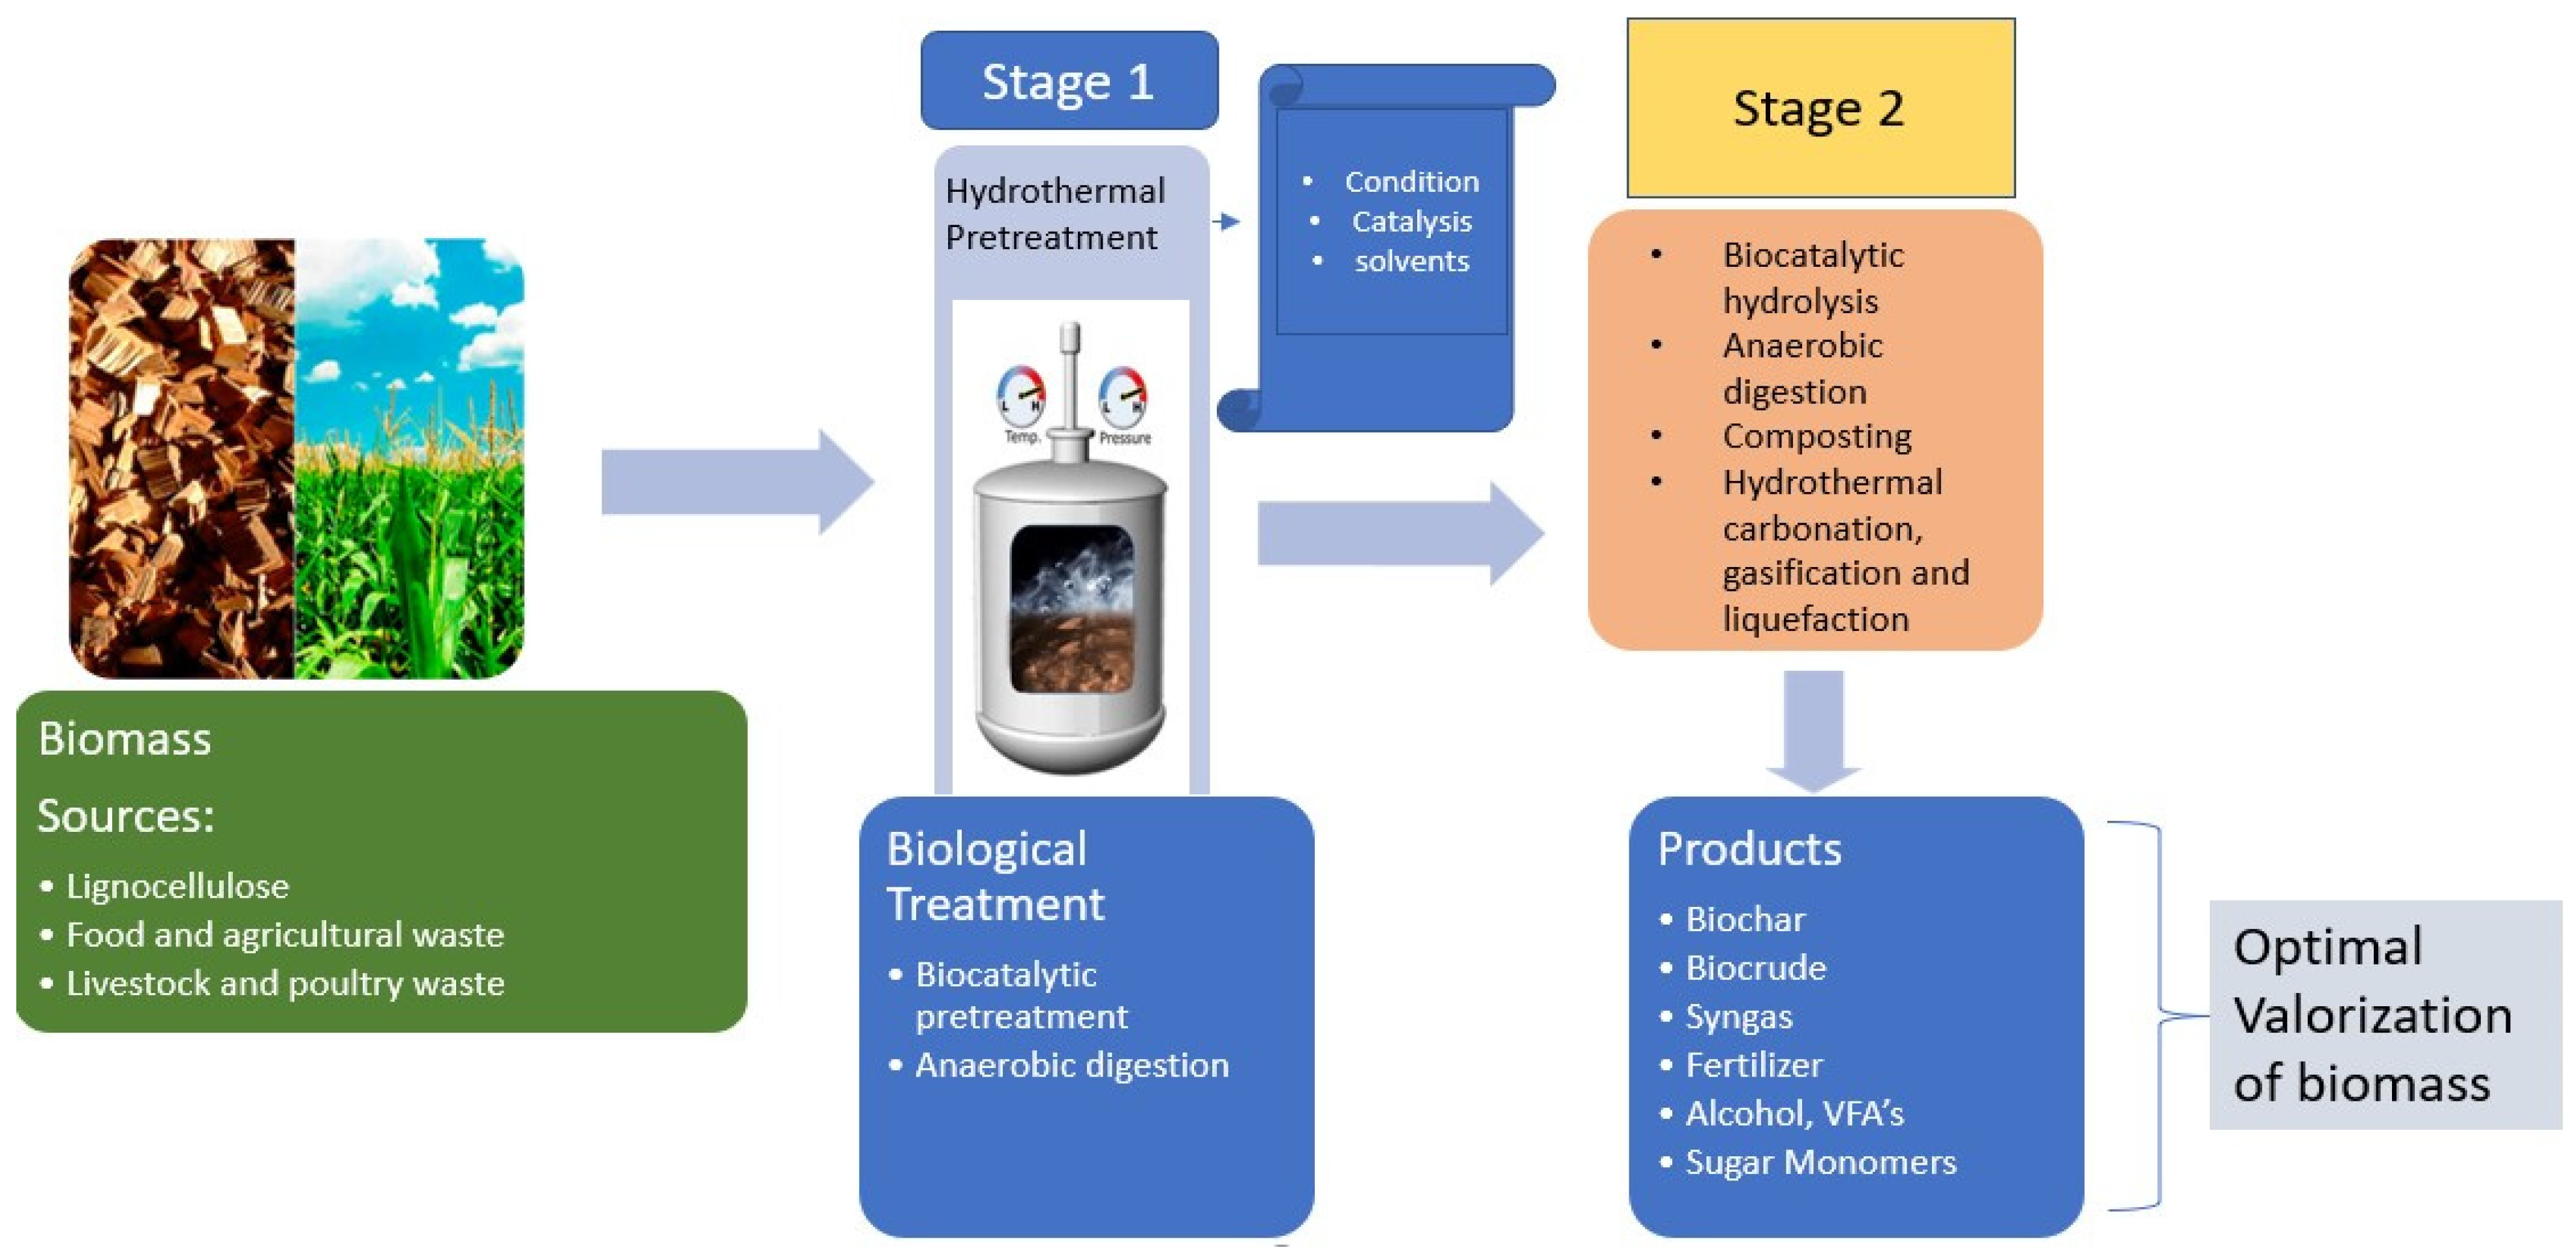 New Proposal in a Biorefinery Context: Recovery of Acetic and Formic Acids  by Adsorption on Hydrotalcites